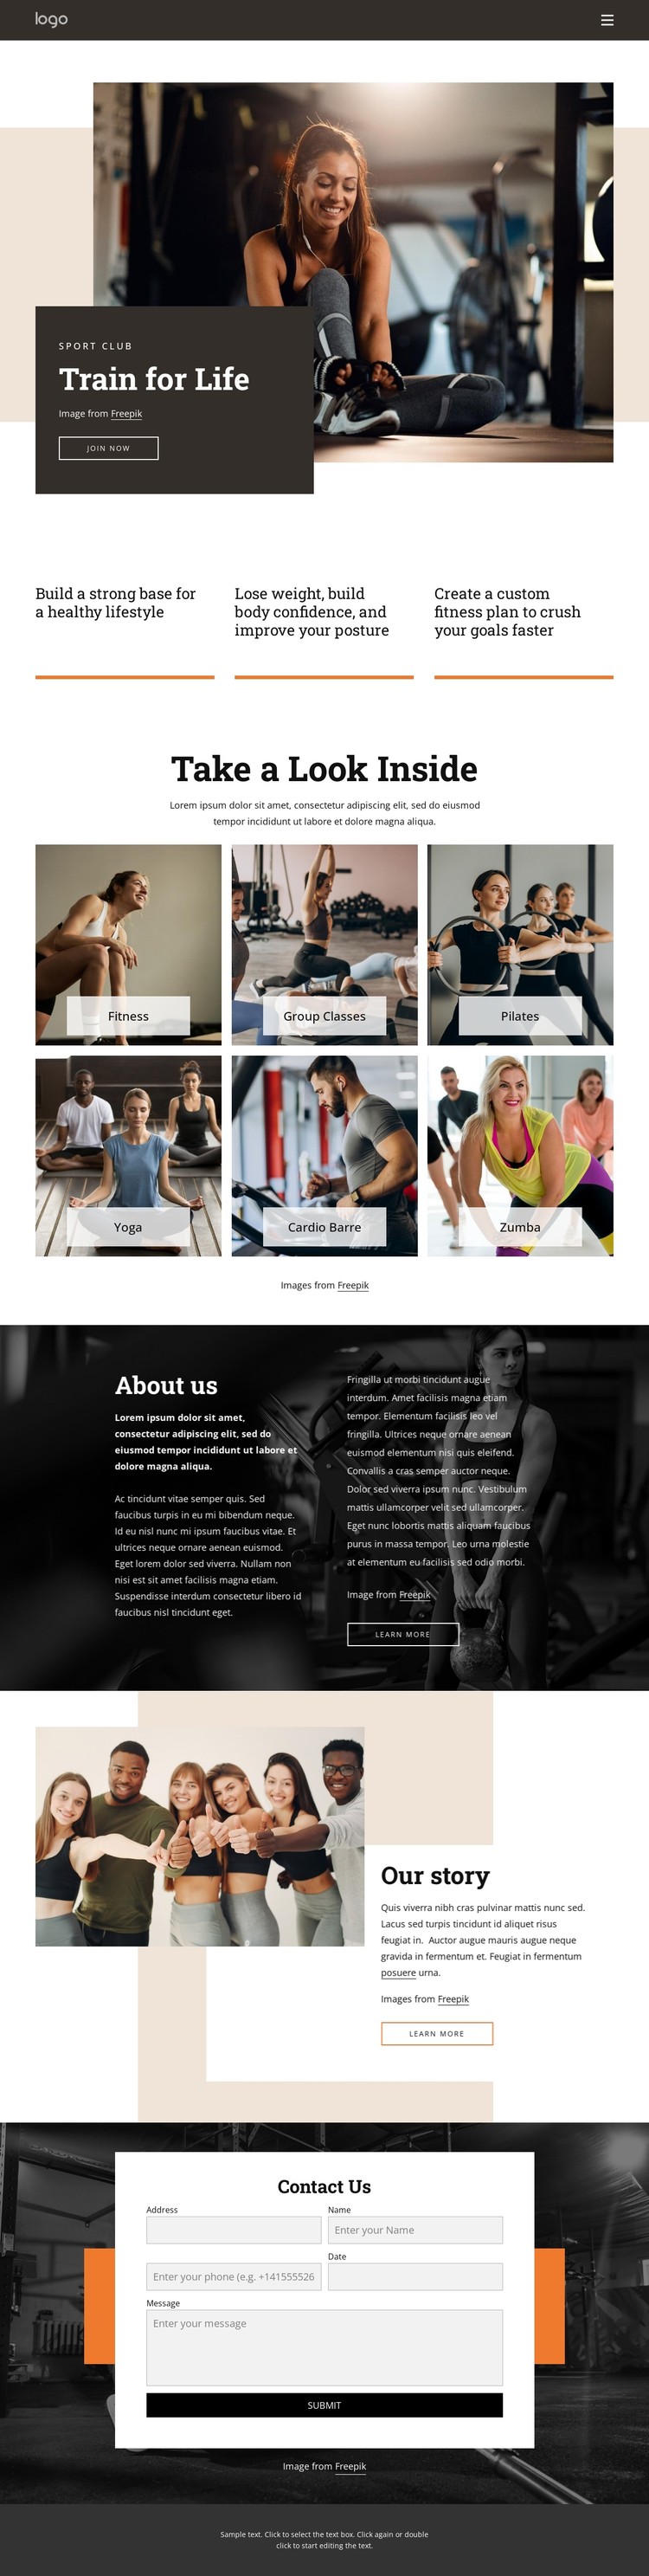 Get moving with our range of classes CSS Template